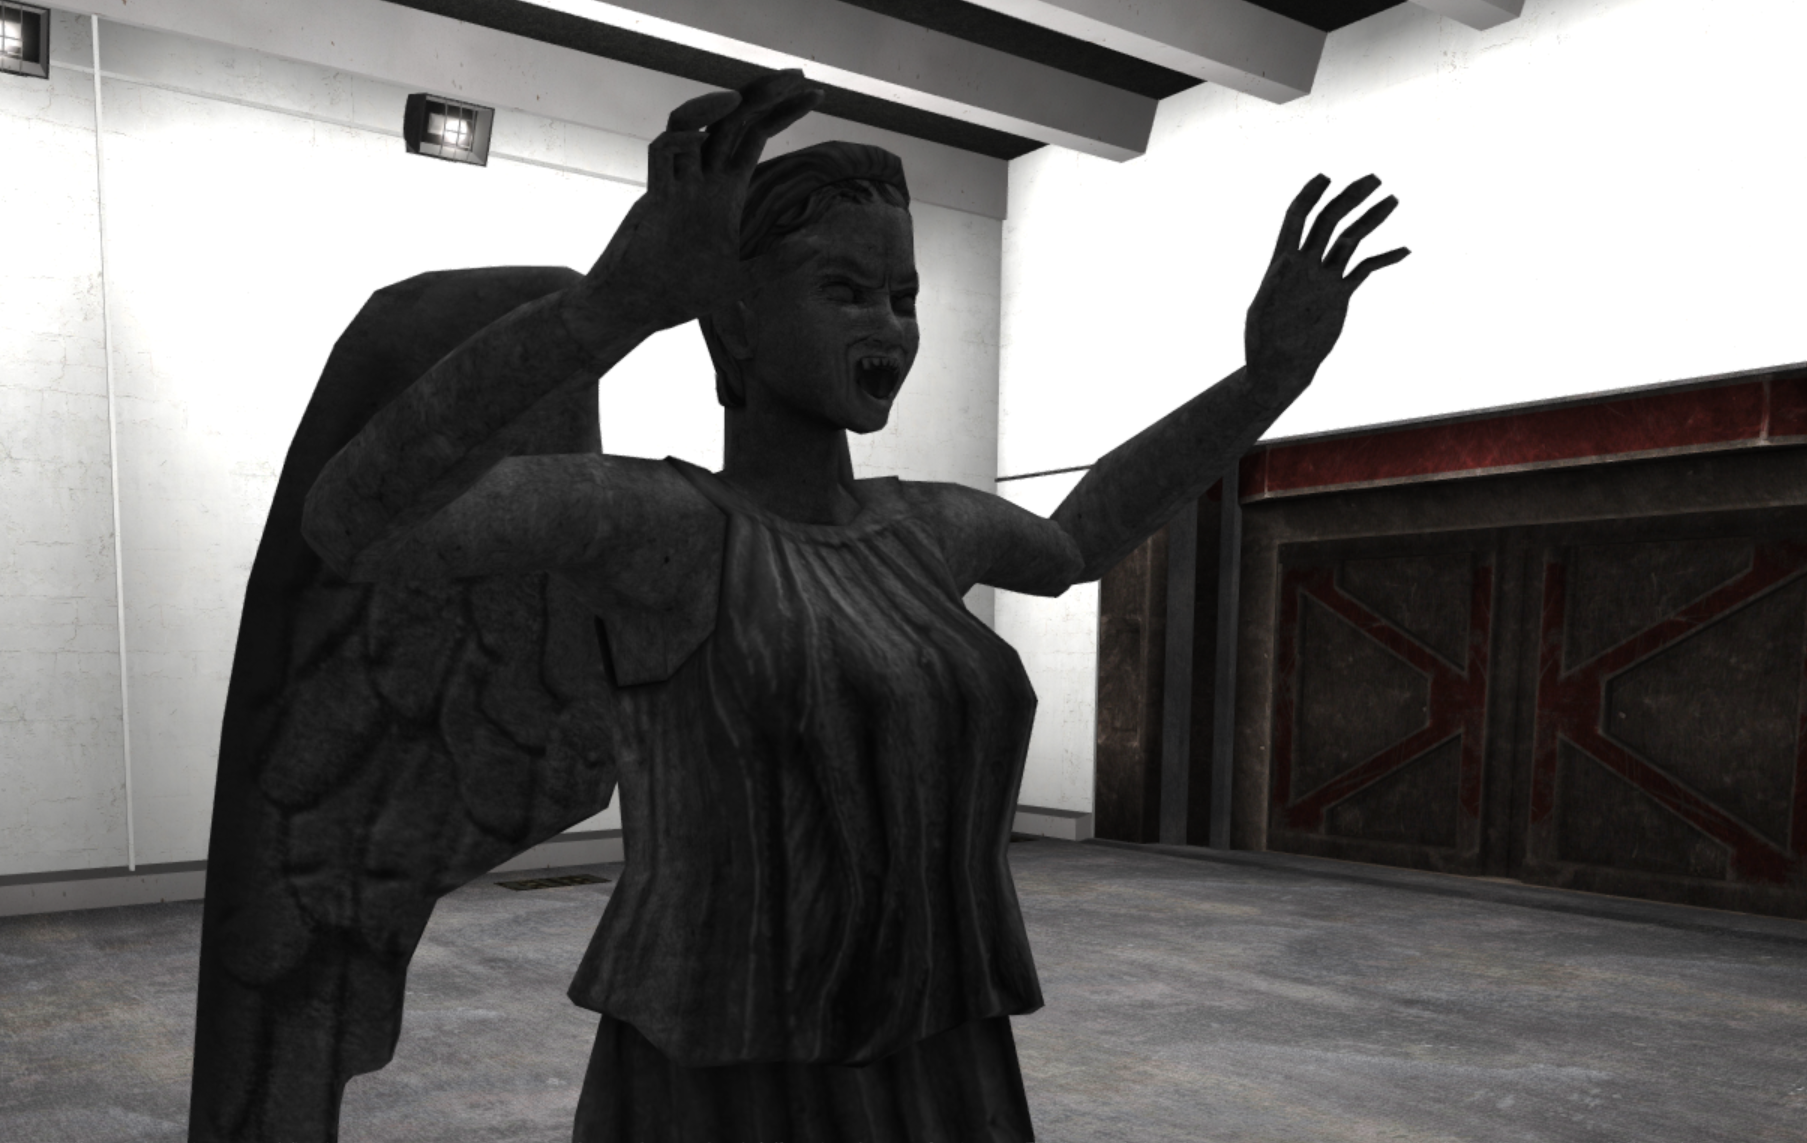 Preview Image Scp 173 Weeping Angel Mod For Scp Containment Breach Mod Db